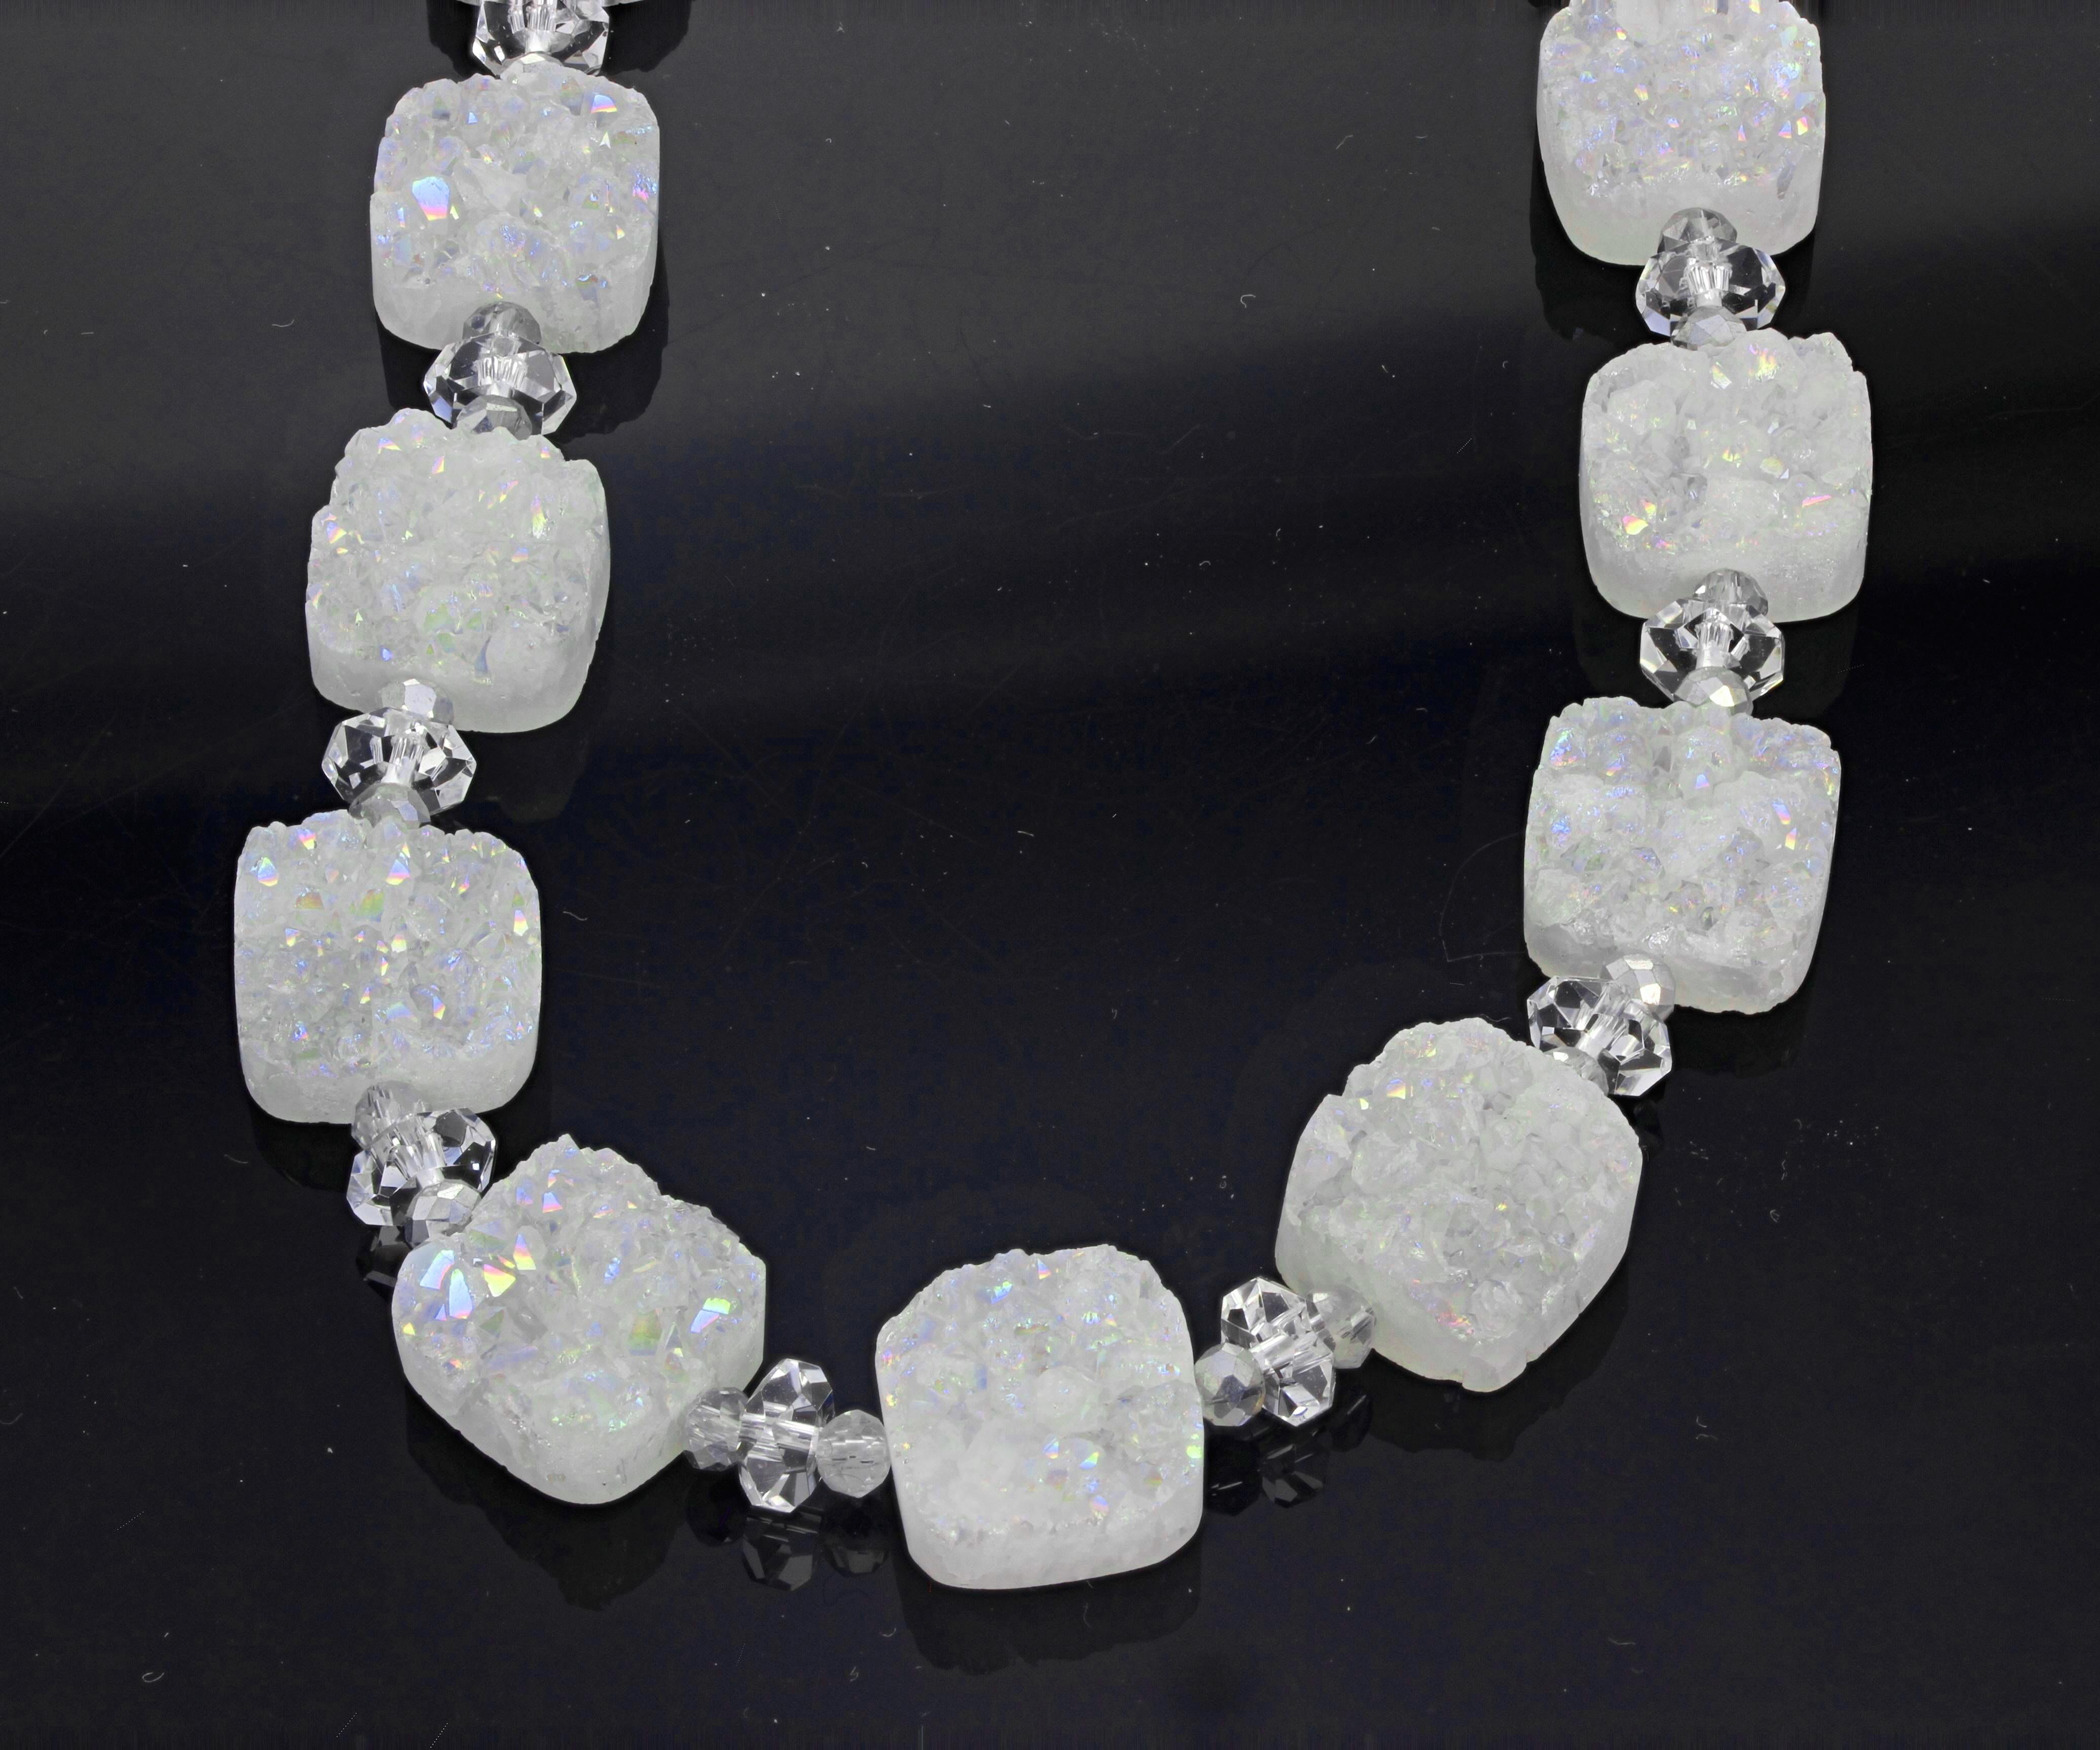 These natural White Druzy Quartz glitter brilliantly in this simple 17 inch long necklace.  The Druzys are approximately 13mm x 13mm.  The large gemcut  sparkling spacer translucent bright natural gemcut Quartz are approximately 13mm round.  The